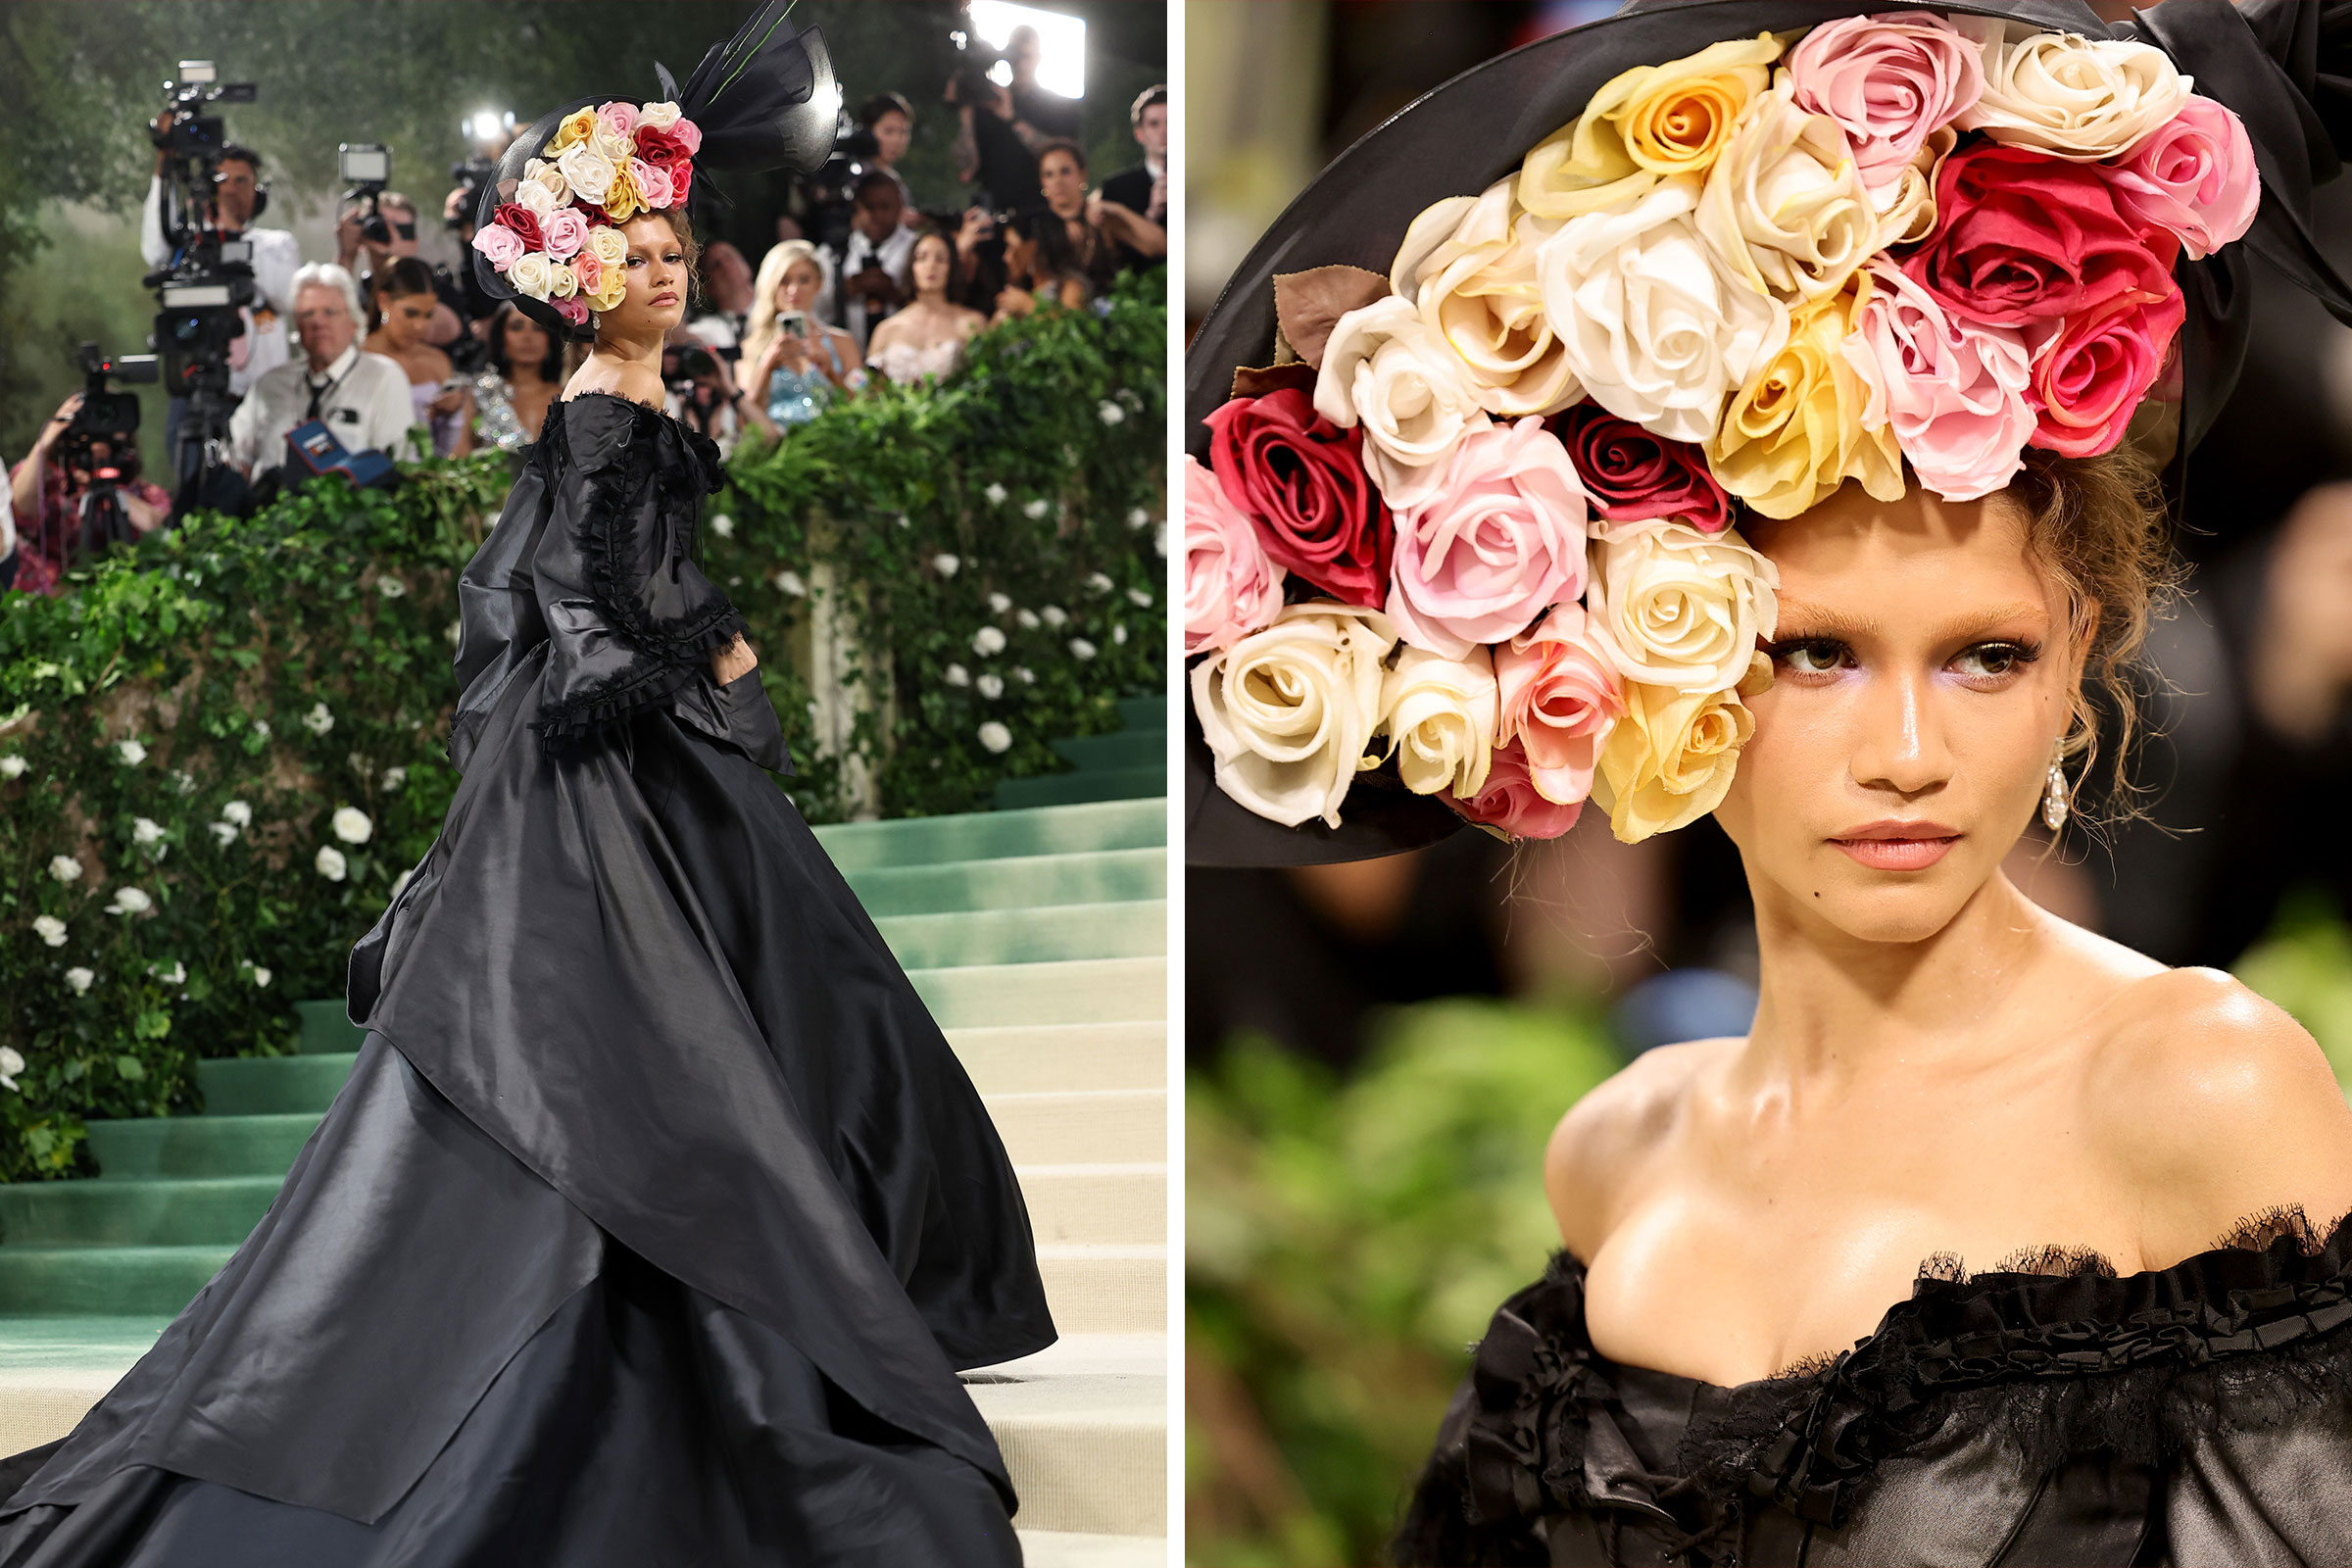 Zendaya attends the met Gala wearing a long black dress and a headpiece made of roses